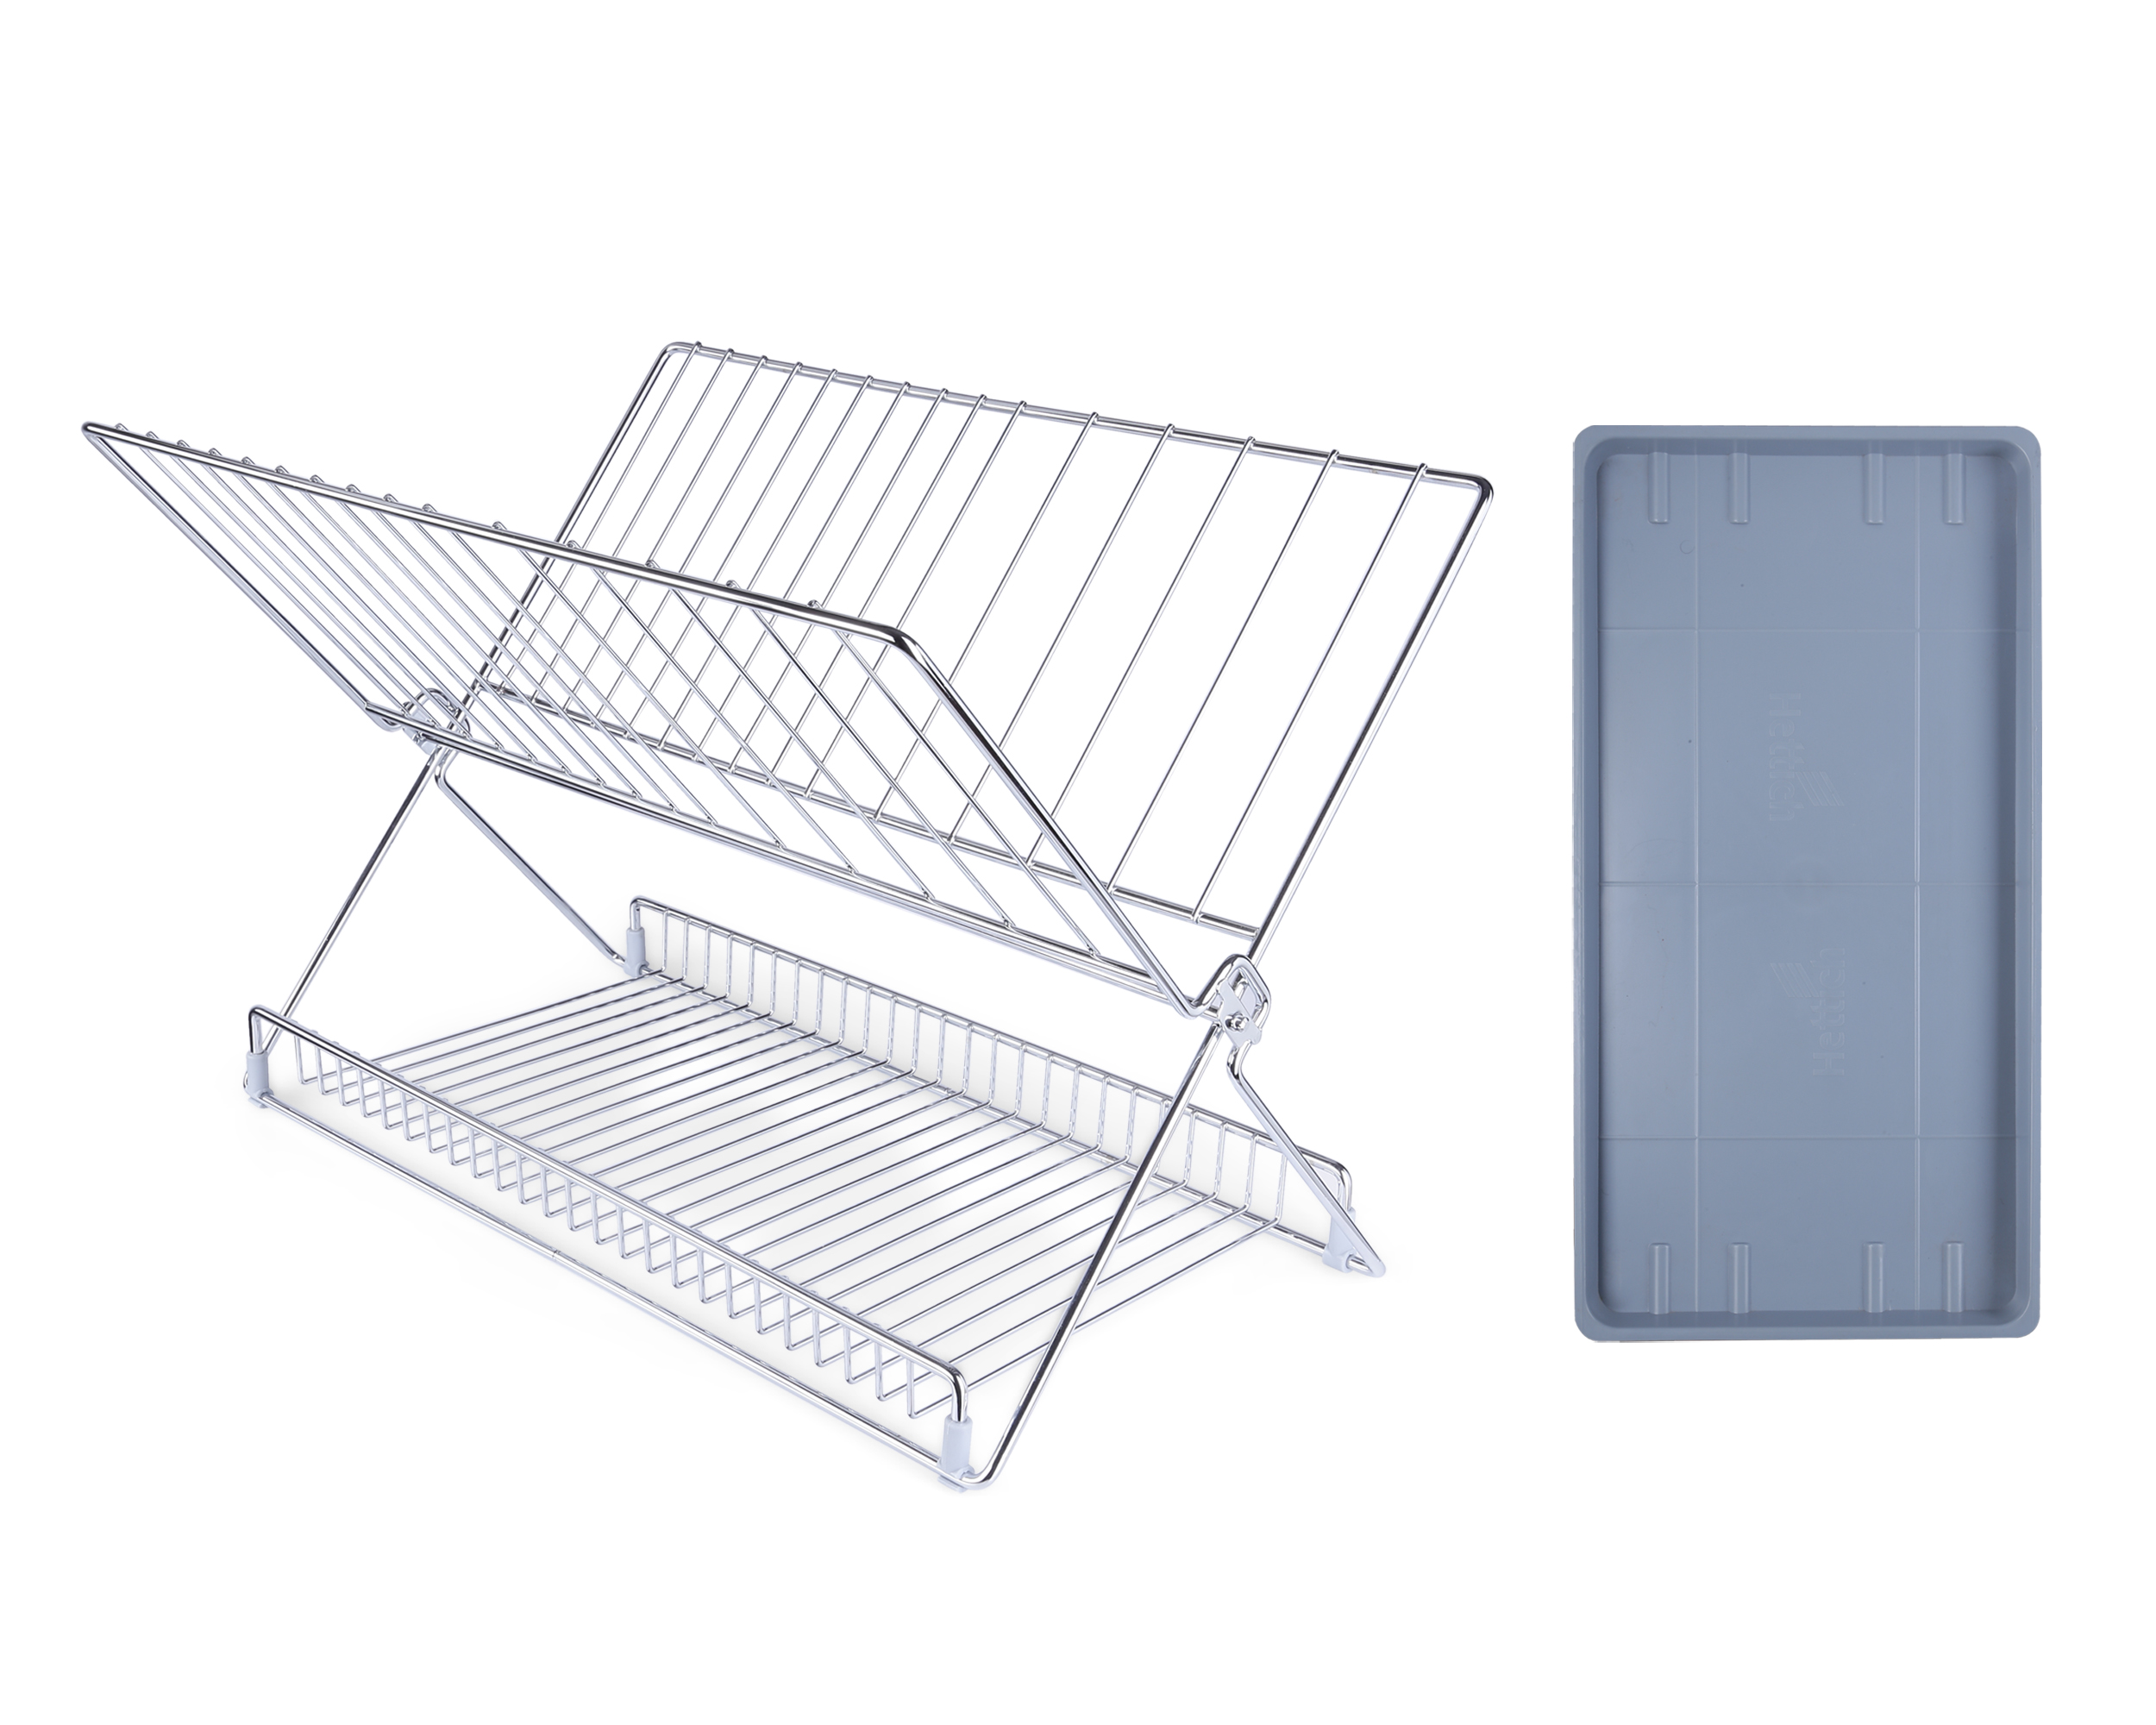 Hettich Stainless Steel Cargo Portable Dish Drainer with PVC Tray - 5 Year Warranty Against Rusting 